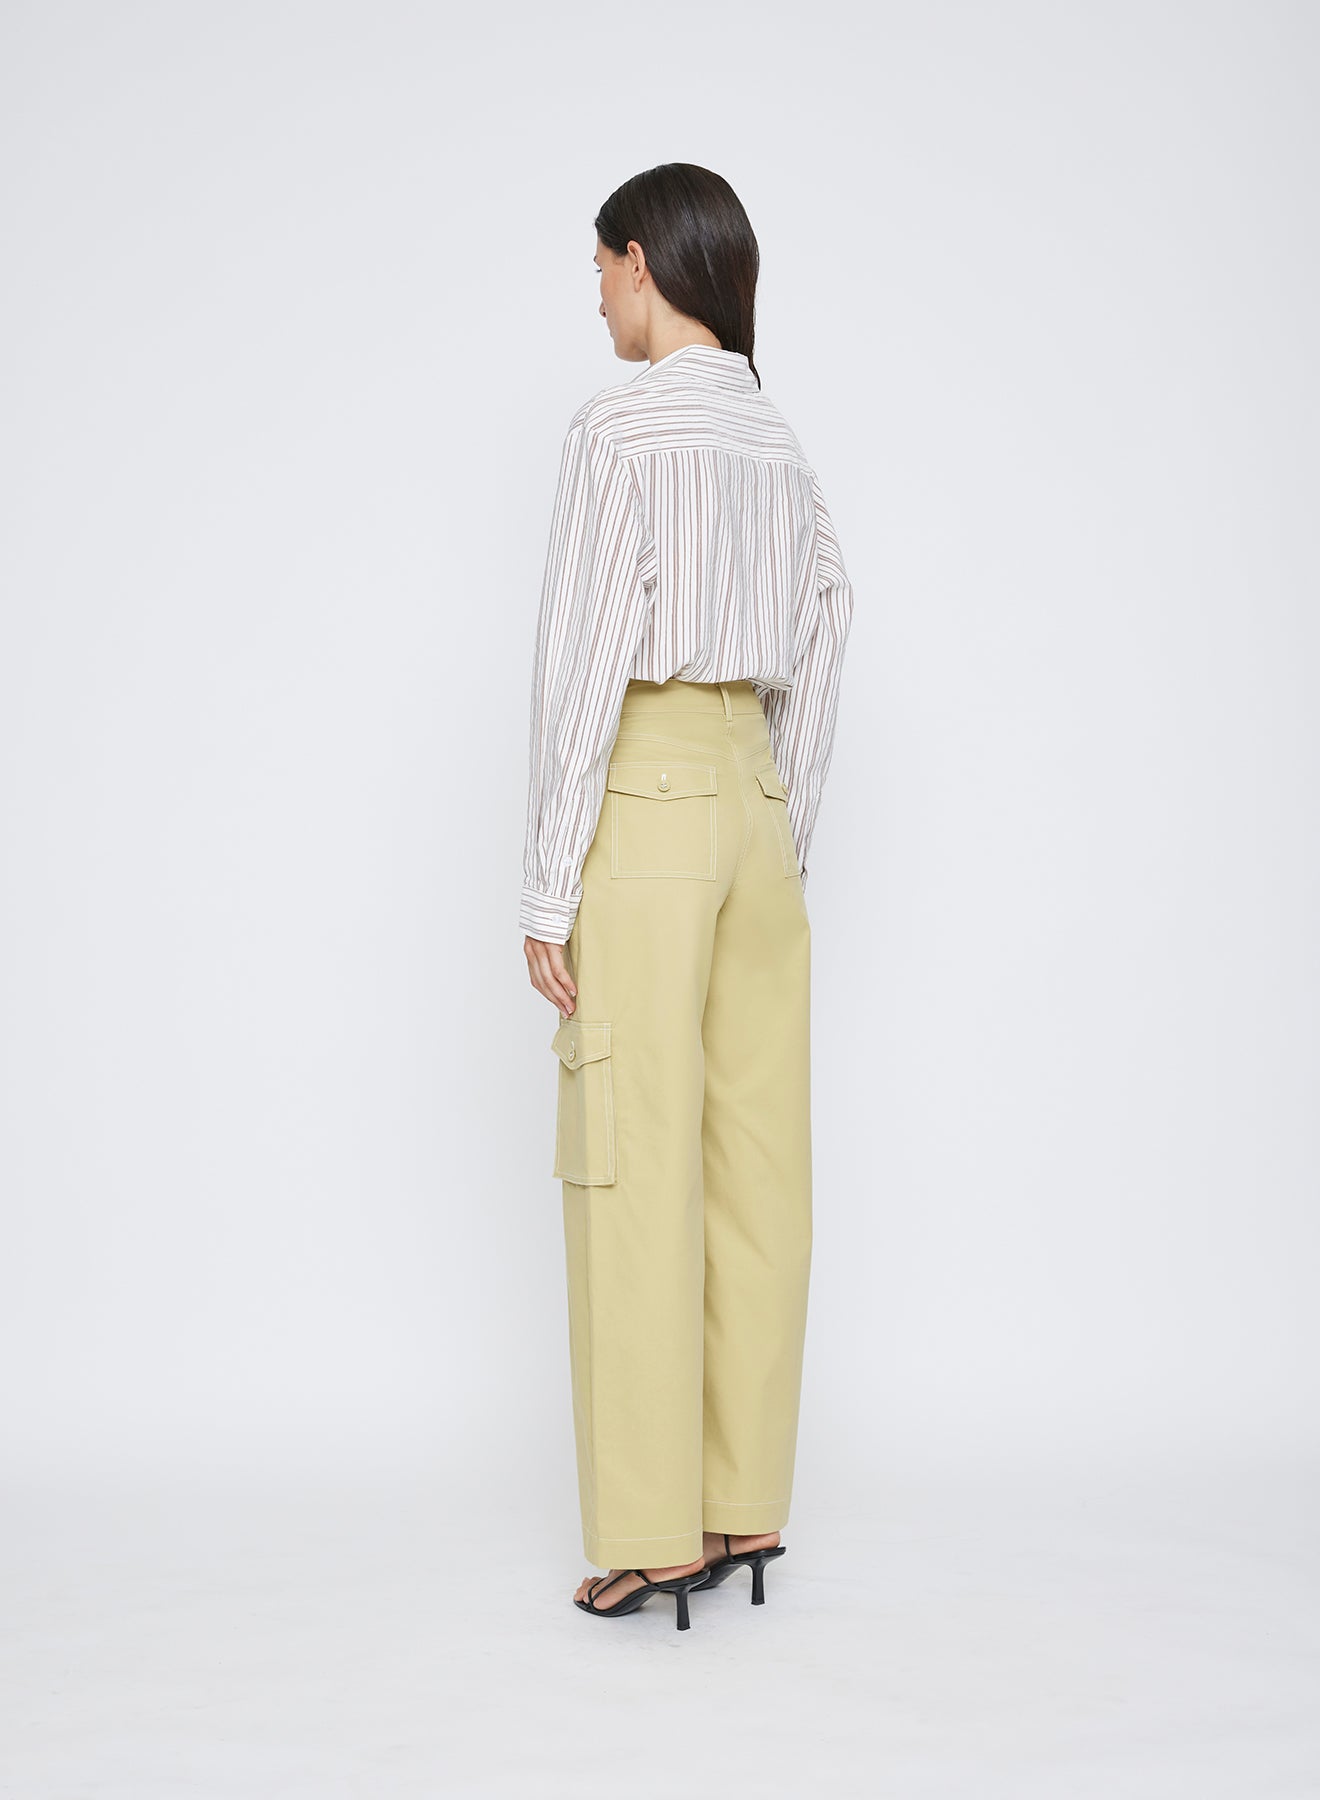 ANNA HIGH WAIST PANT IN ORCHID WHITE